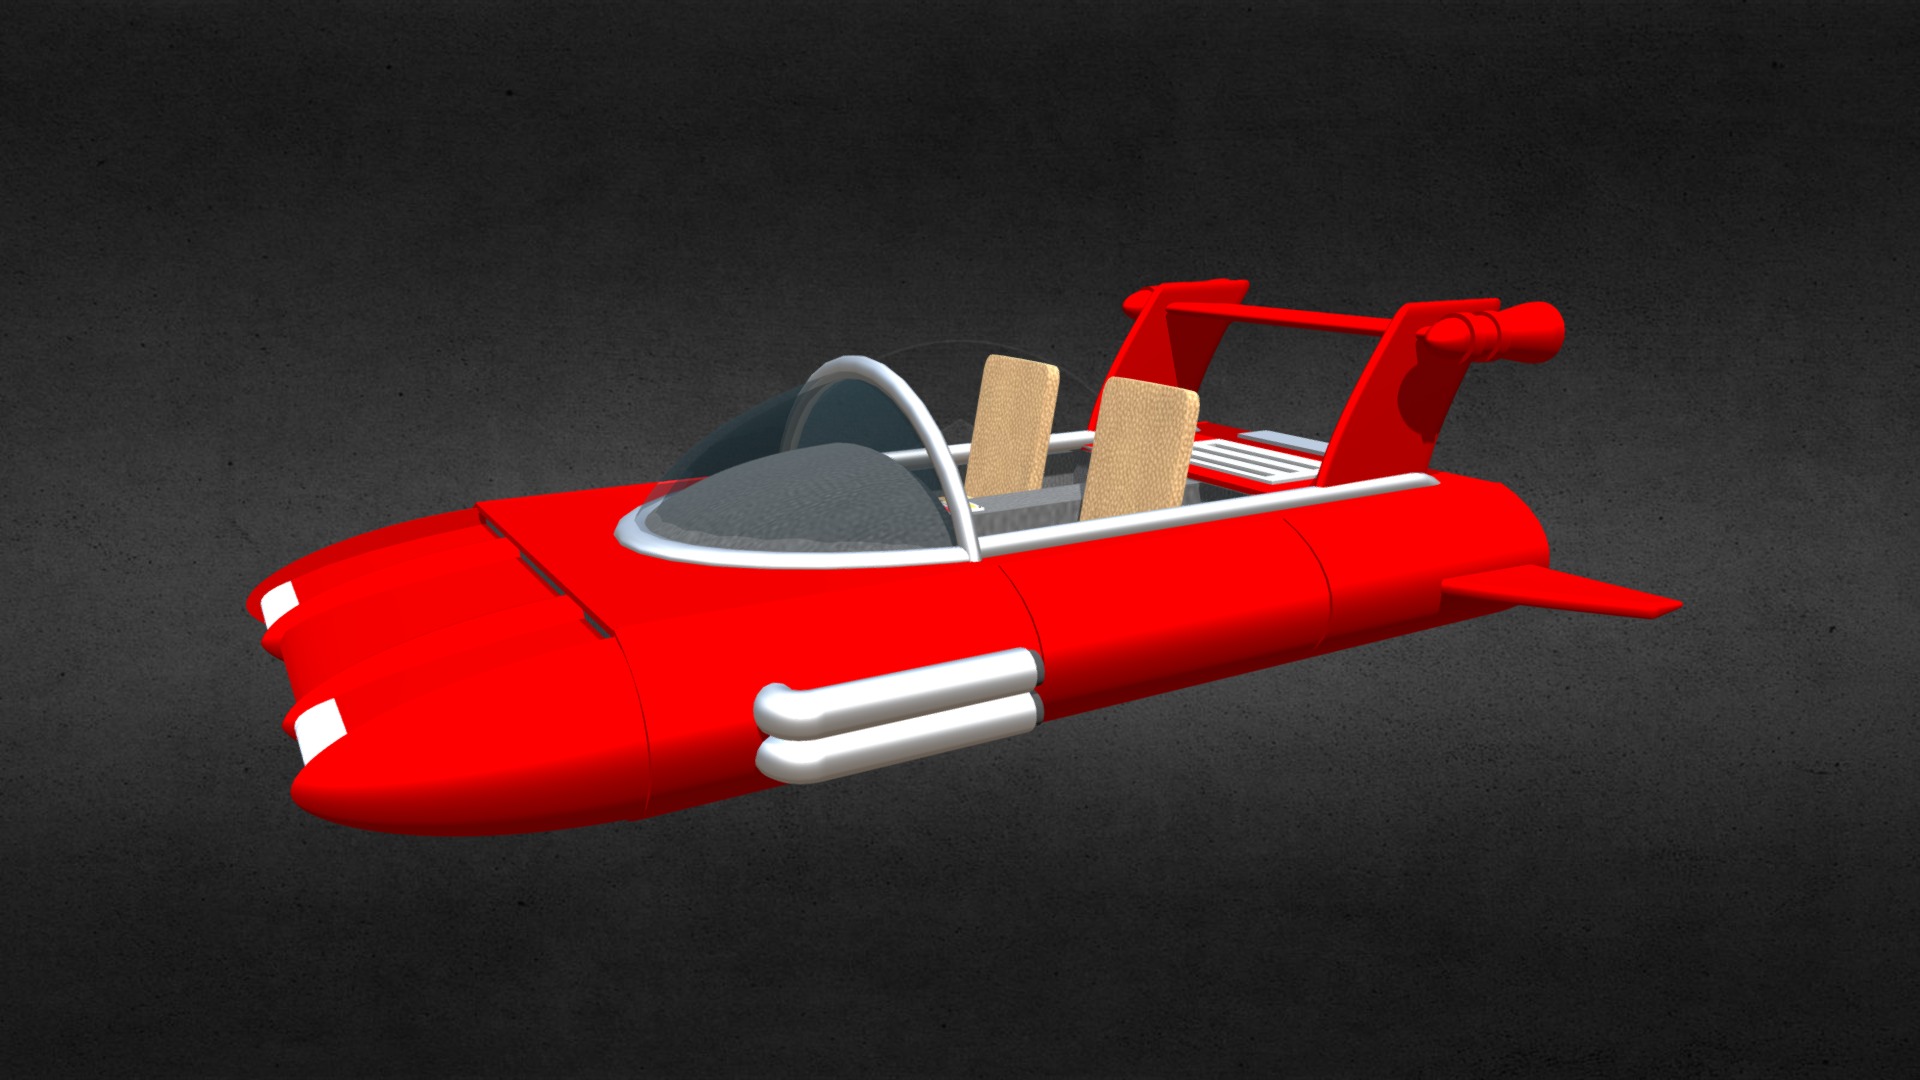 3D model Retro Racer - This is a 3D model of the Retro Racer. The 3D model is about a red and white toy car.